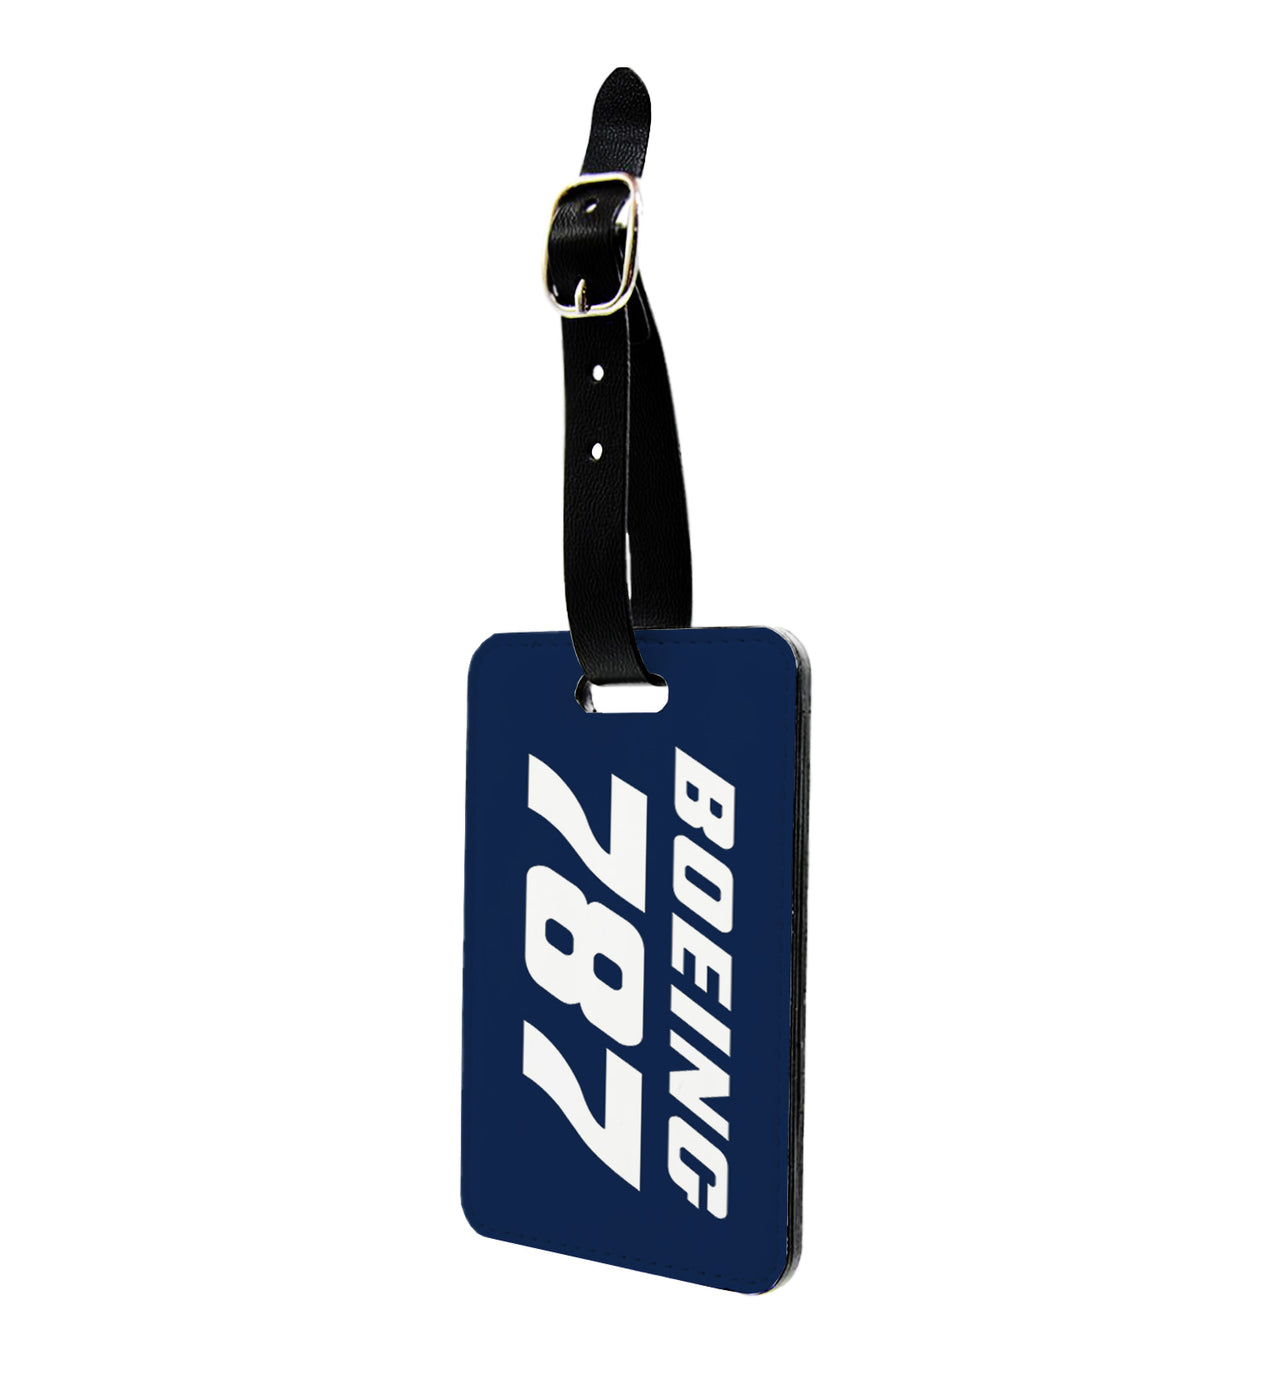 Boeing 787 & Text Designed Luggage Tag